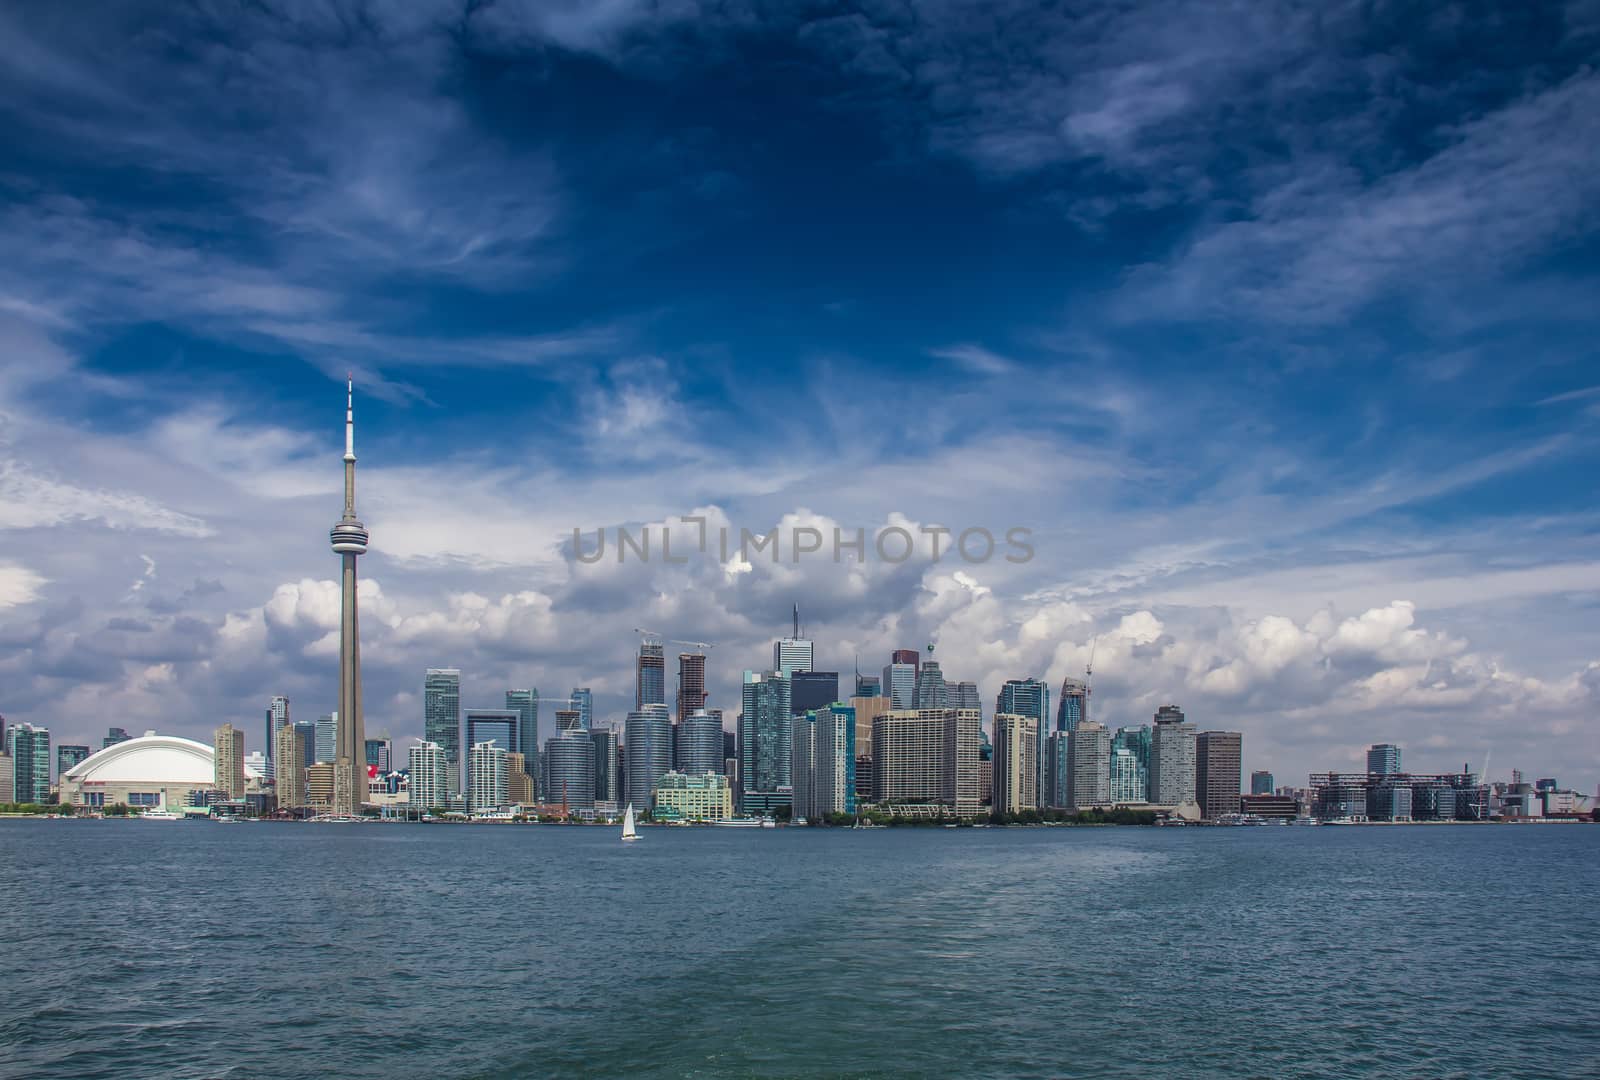 The view of Toronto City by petkolophoto